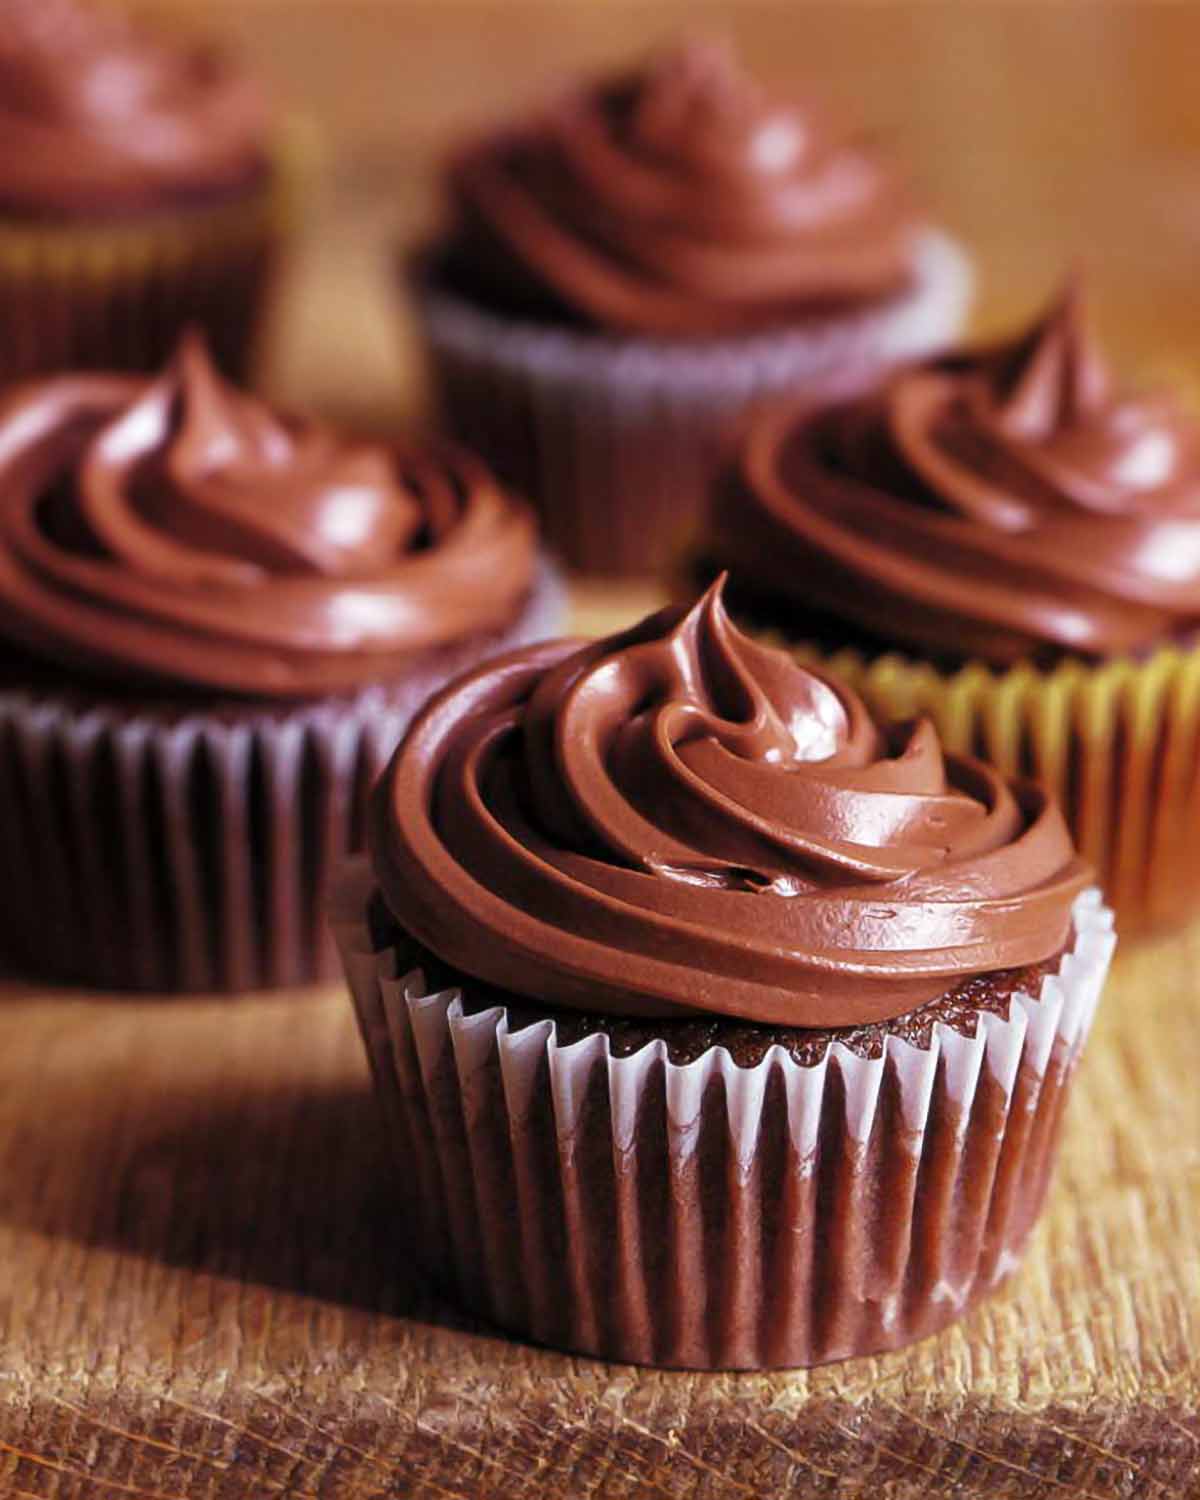 Five chocolate orange cupcakes with swirls of chocolate frosting on top.